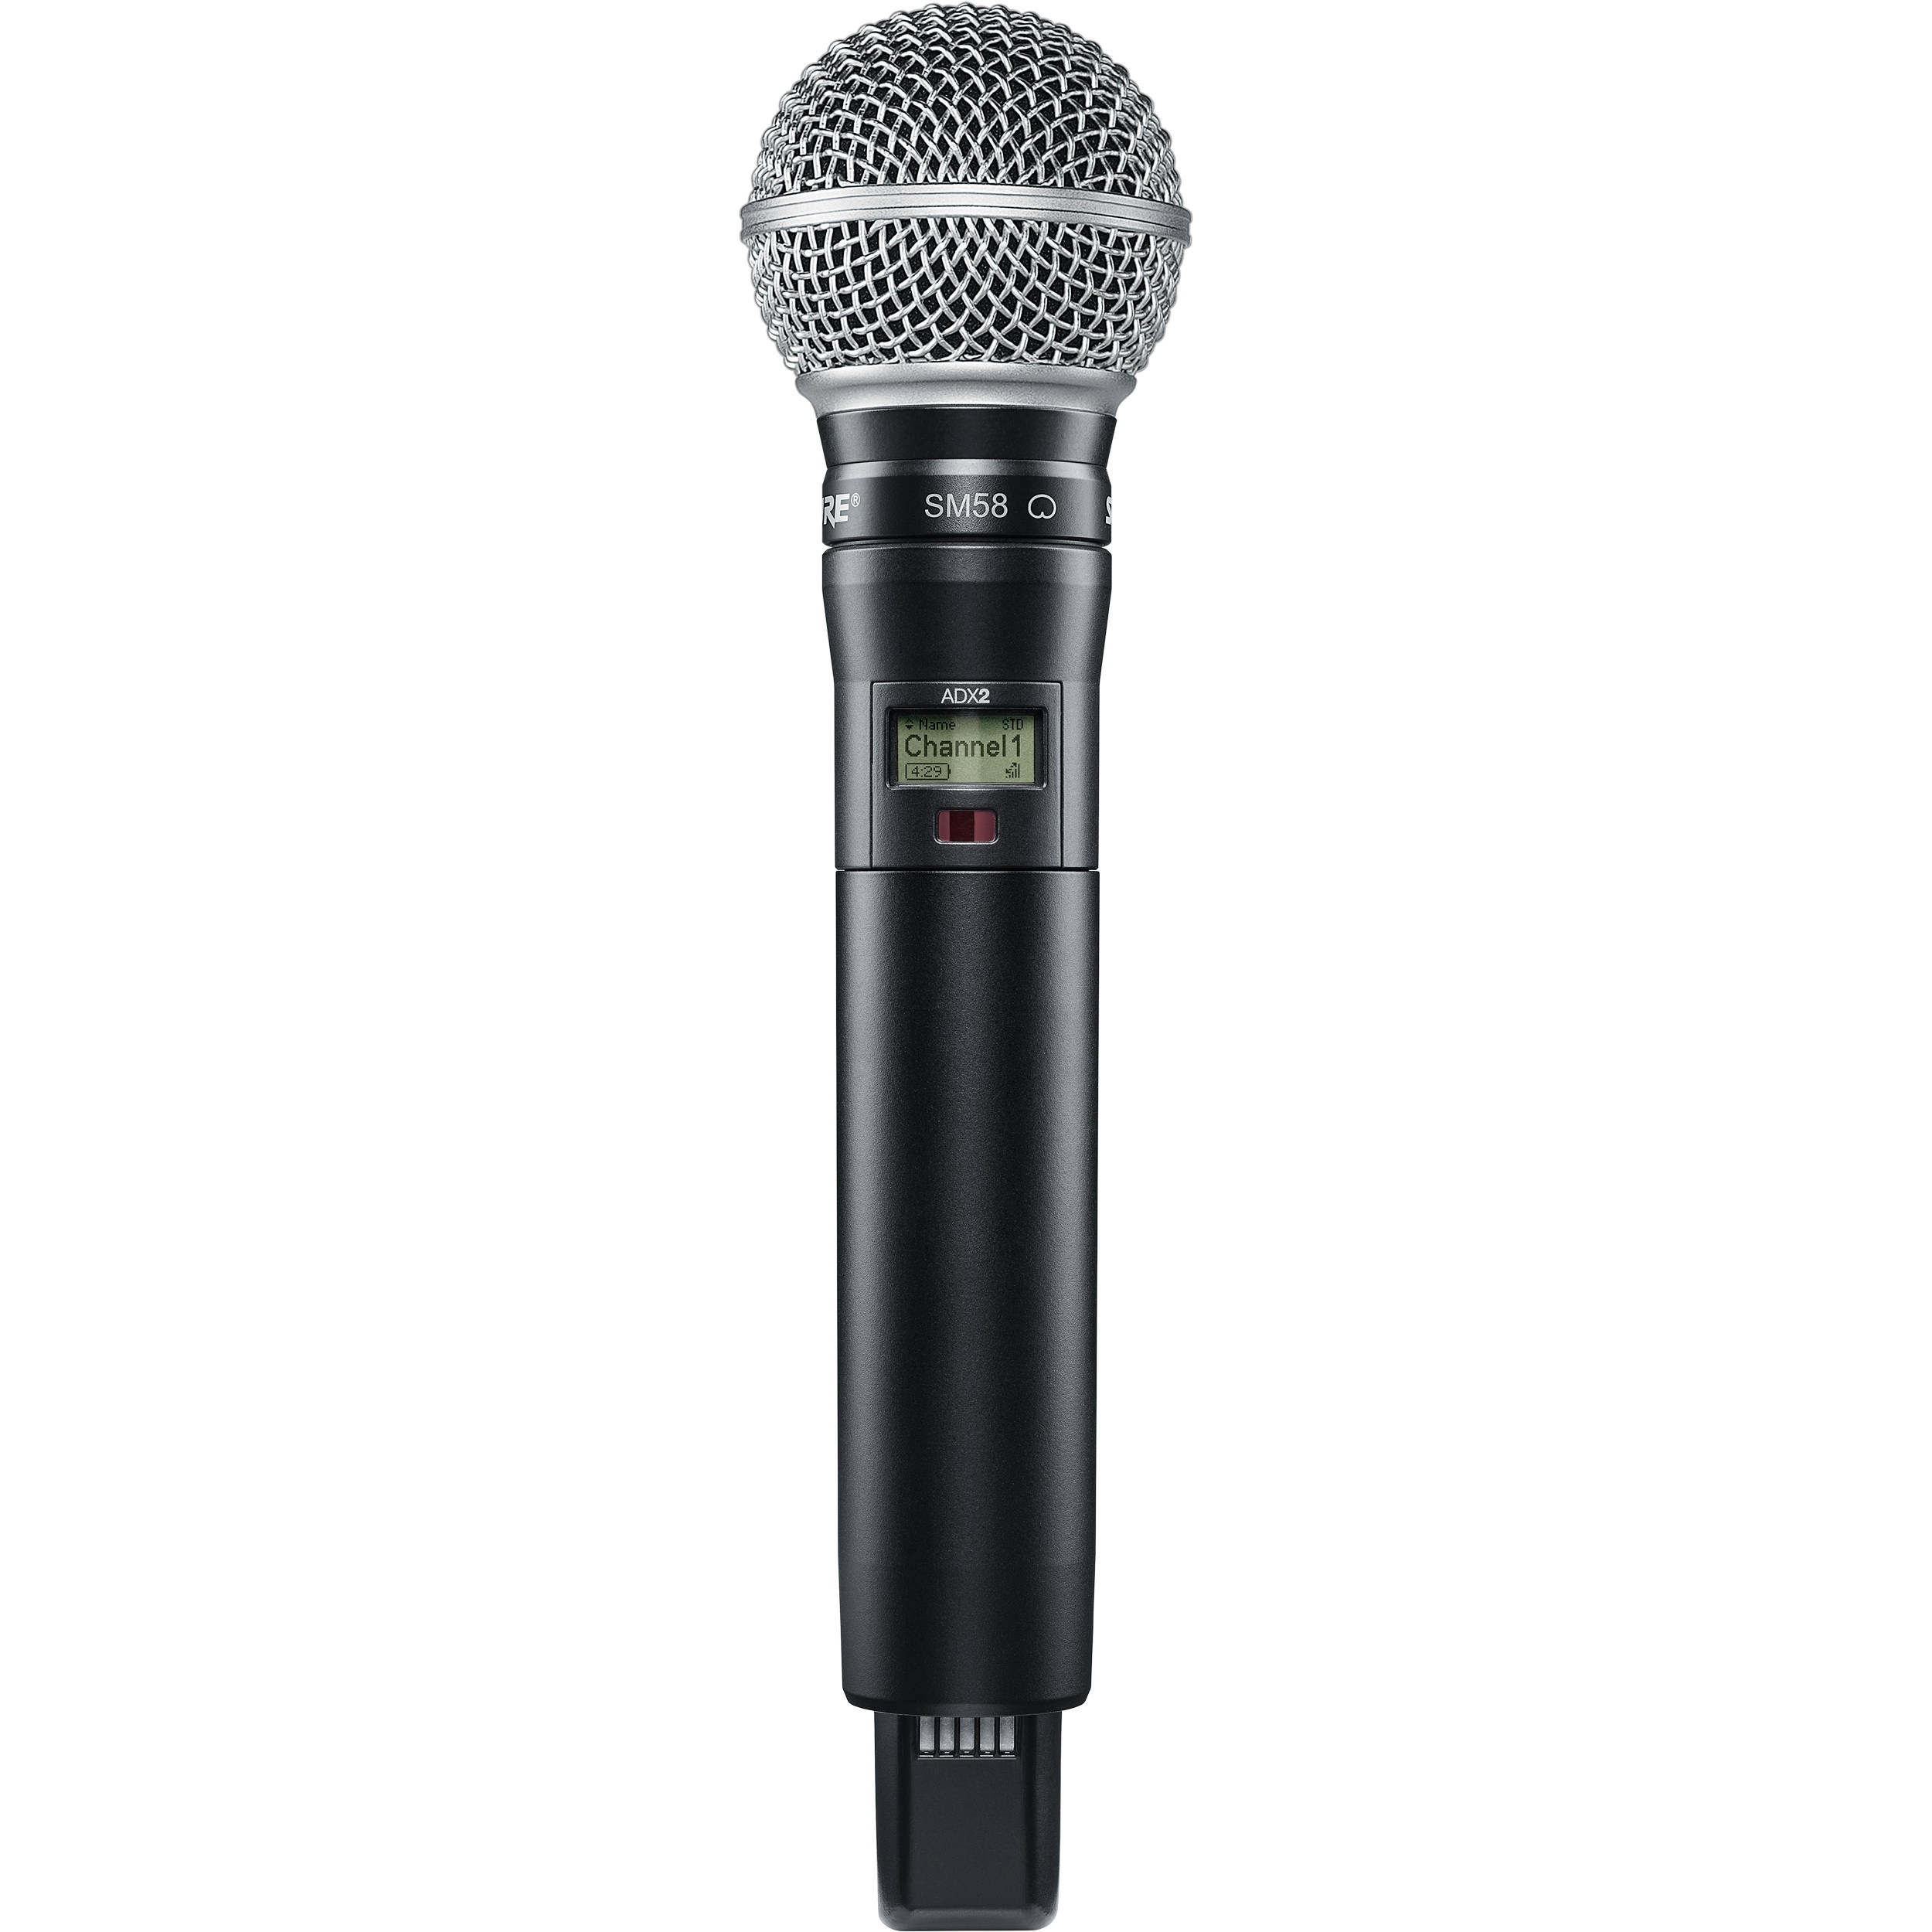 Shure ADX2/SM58 Digital Handheld Wireless Microphone Transmitter with SM58 Capsule